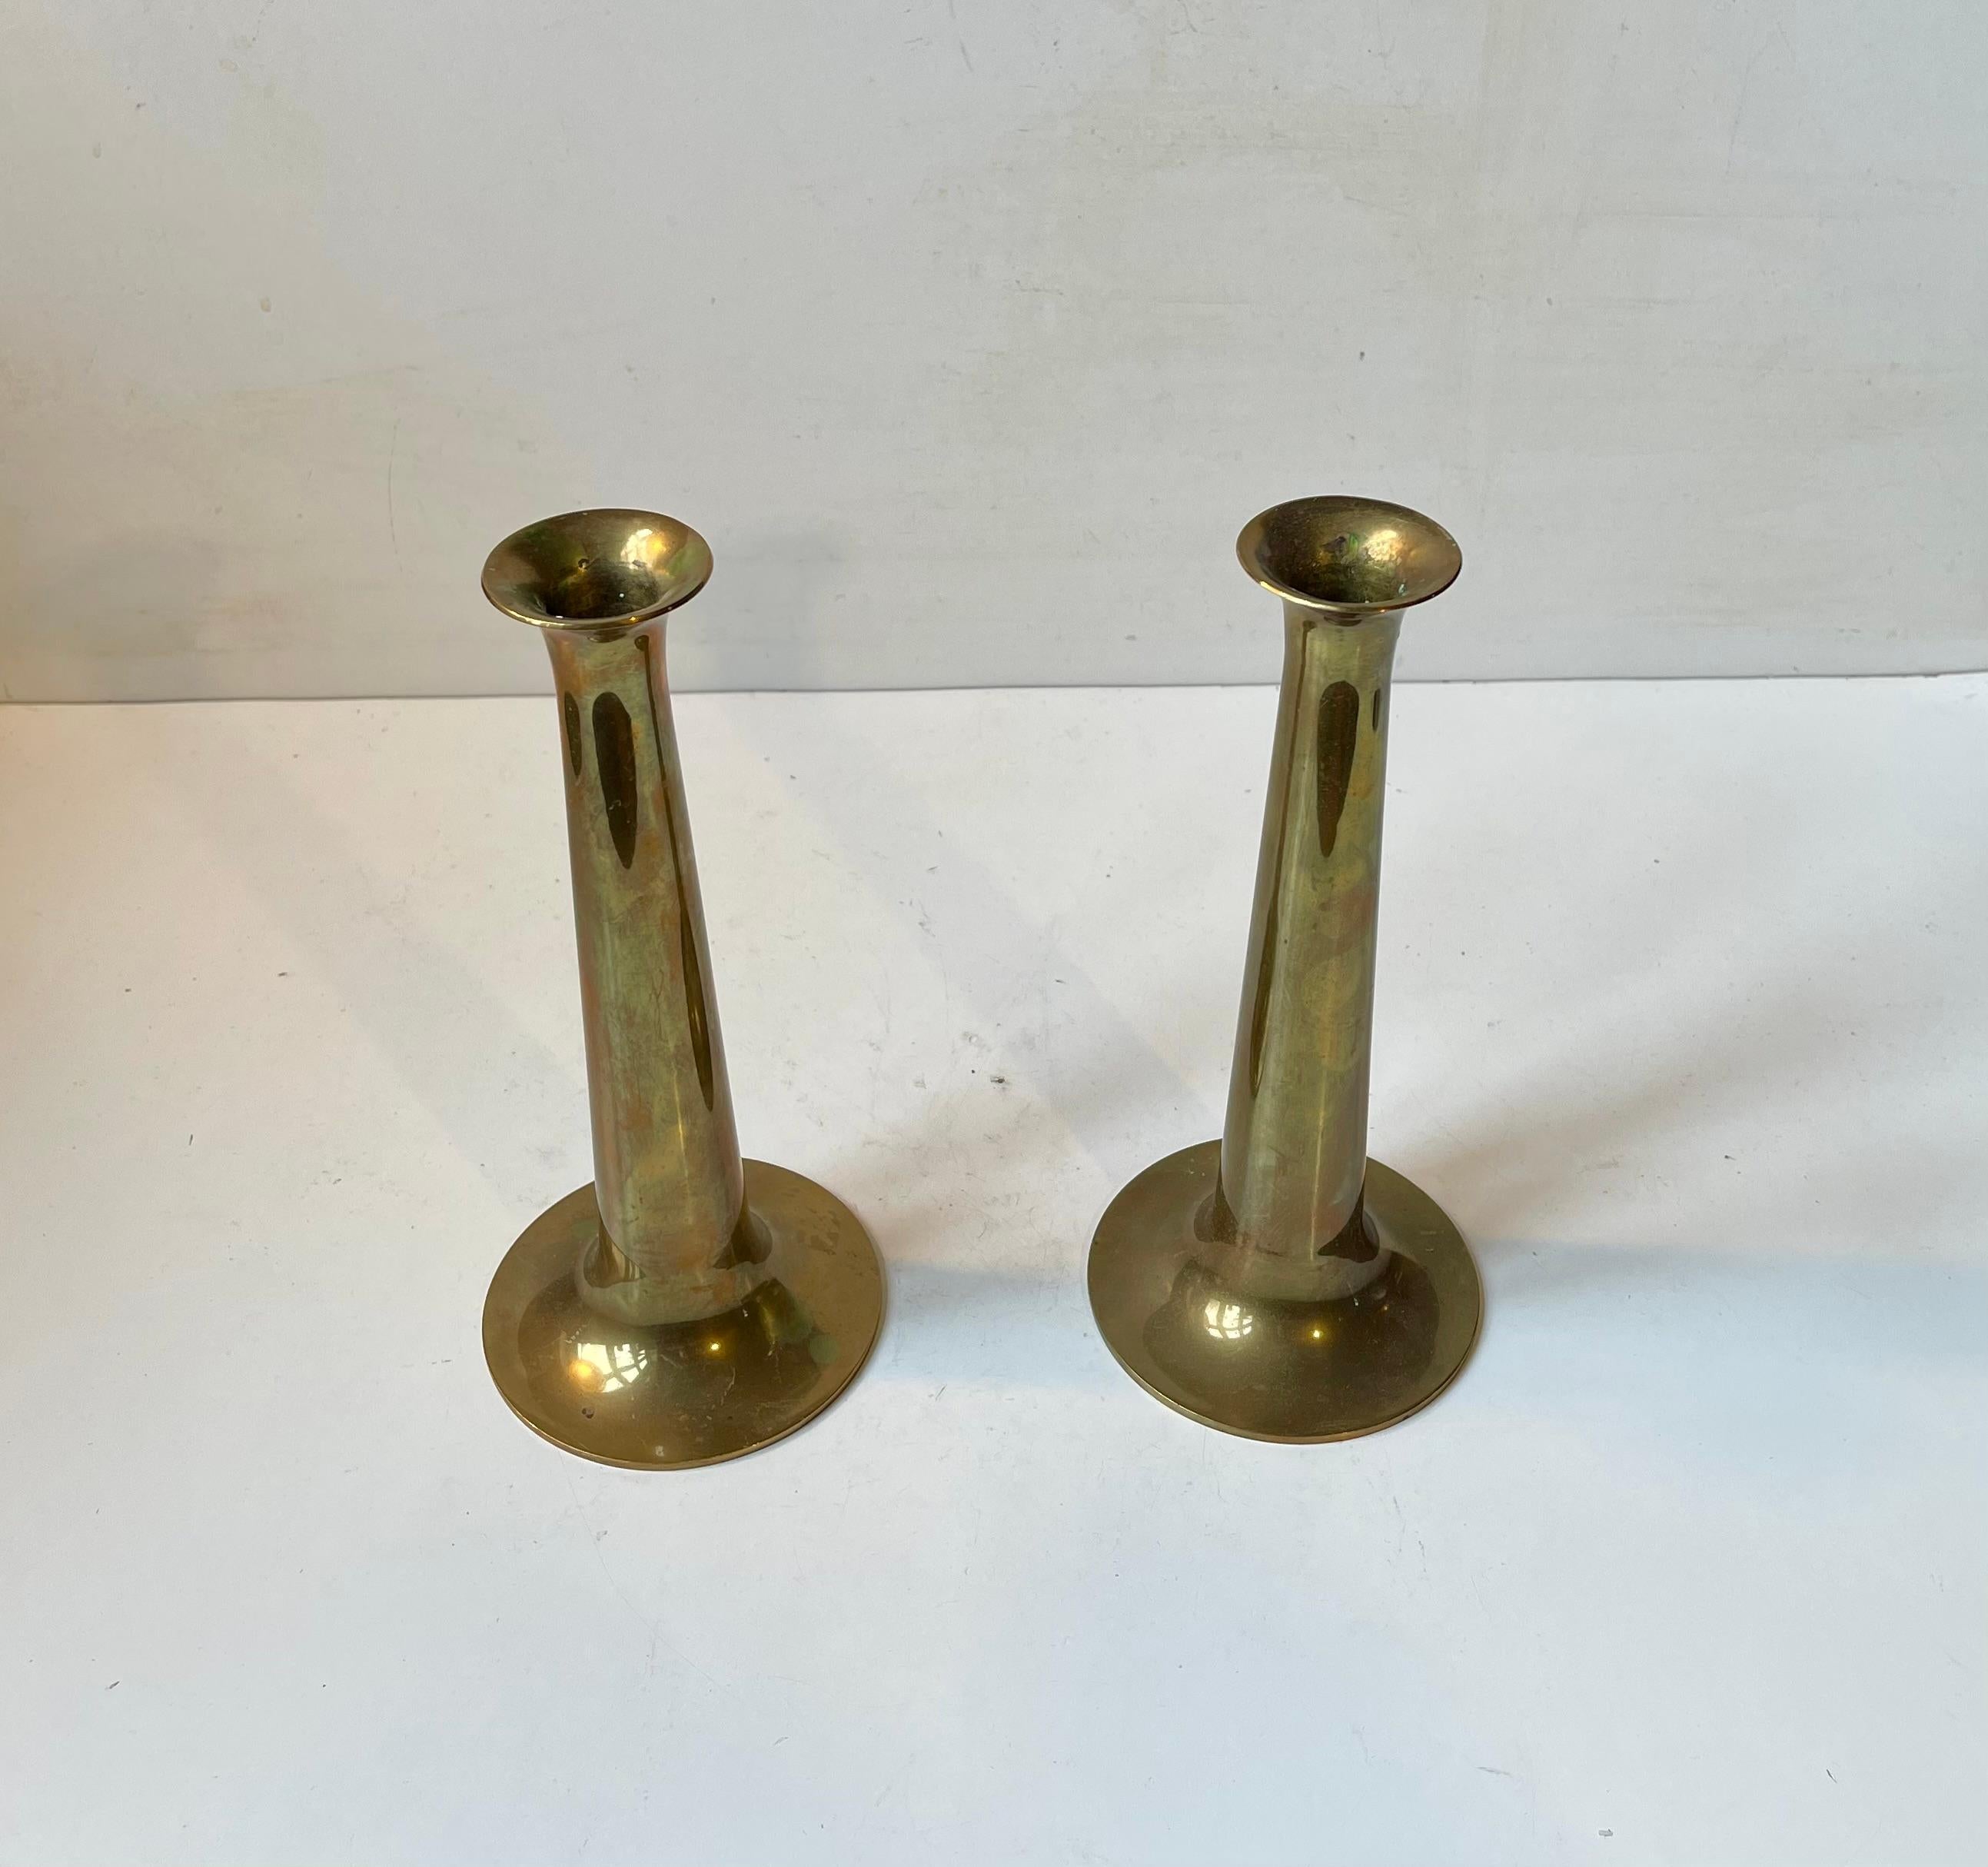 This pair of candlesticks was designed by Hans Bølling and manufactured by Torben Orskov in Denmark during the 1950s. They are called Fanfare or trumpet and are made from solid brass featuring the manufacturer's mark to each base. For regularized